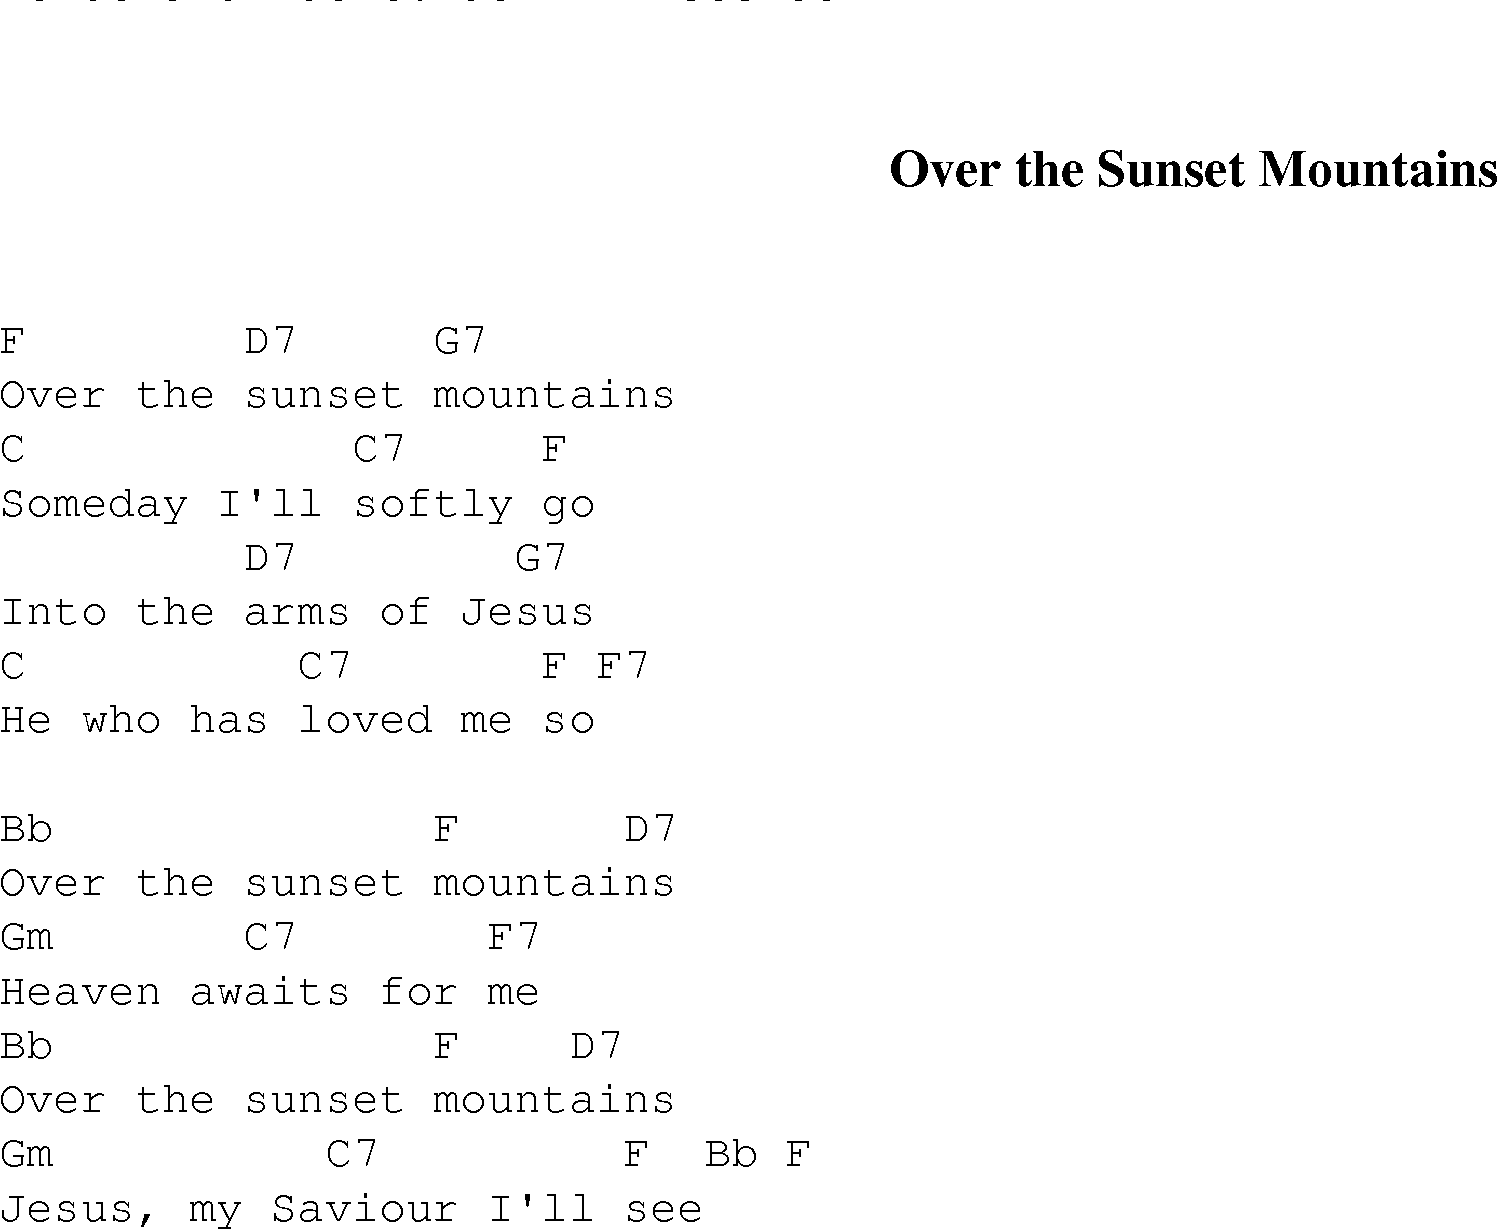 Gospel Song: over_the_sunset_mountains, lyrics and chords.